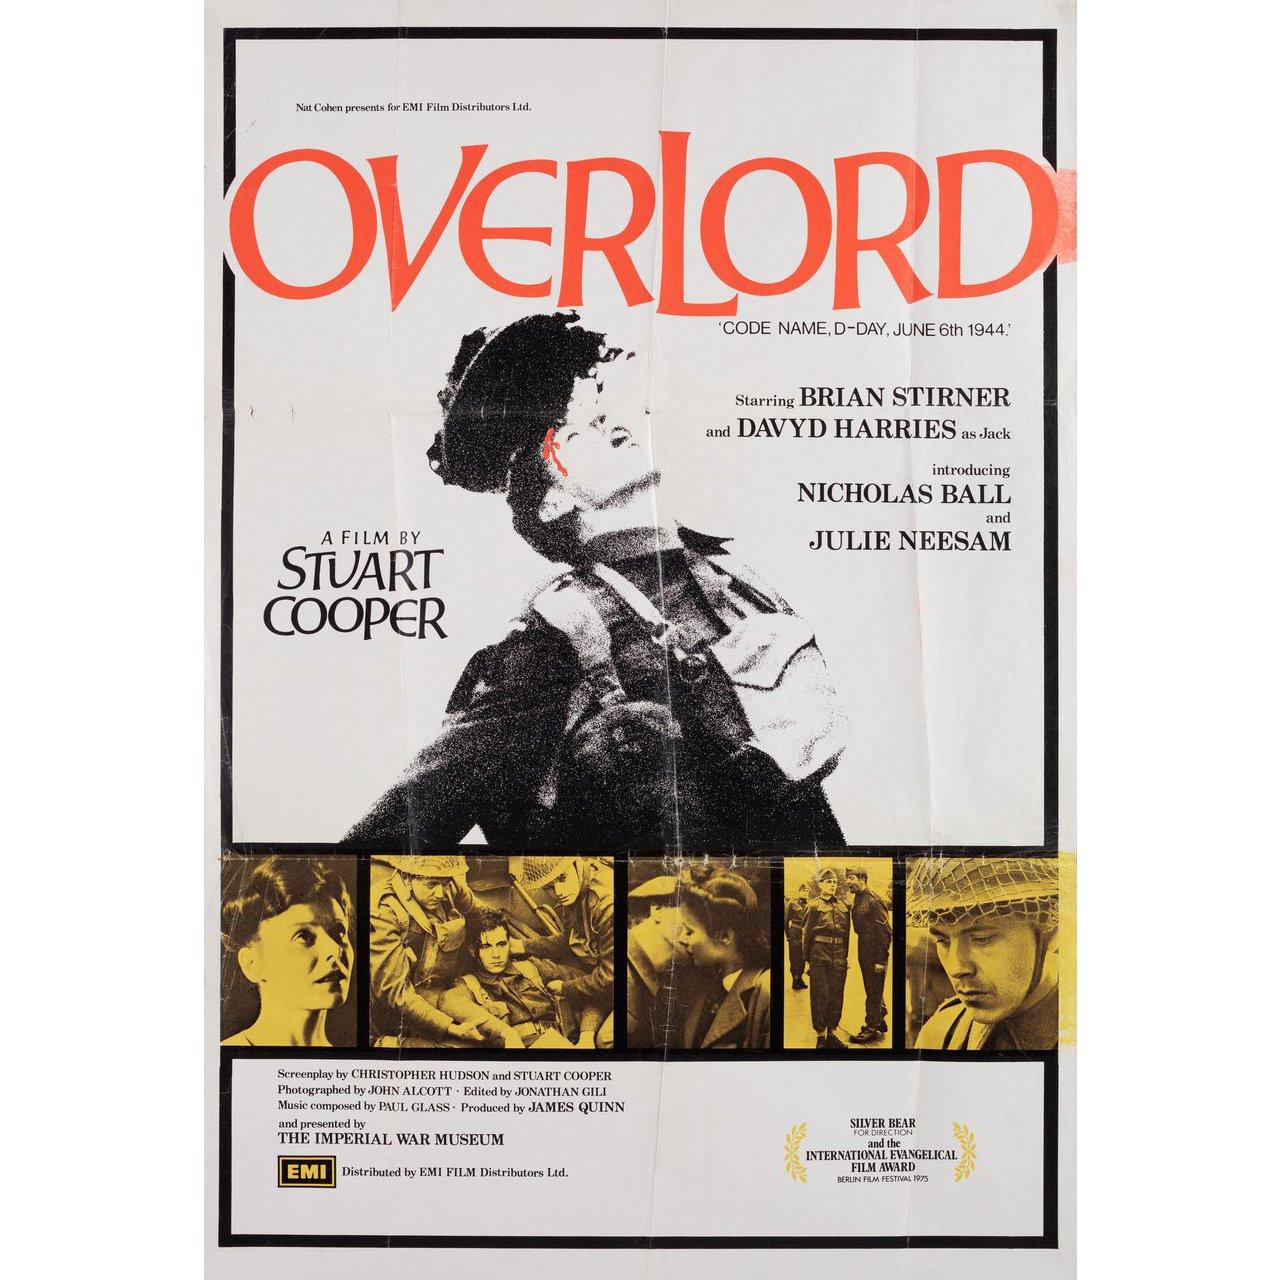 Original 1975 British one sheet poster for the film Overlord directed by Stuart Cooper with Brian Stirner / Davyd Harries / Nicholas Ball. Good-very good condition, folded. Many original posters were issued folded or were subsequently folded. Please